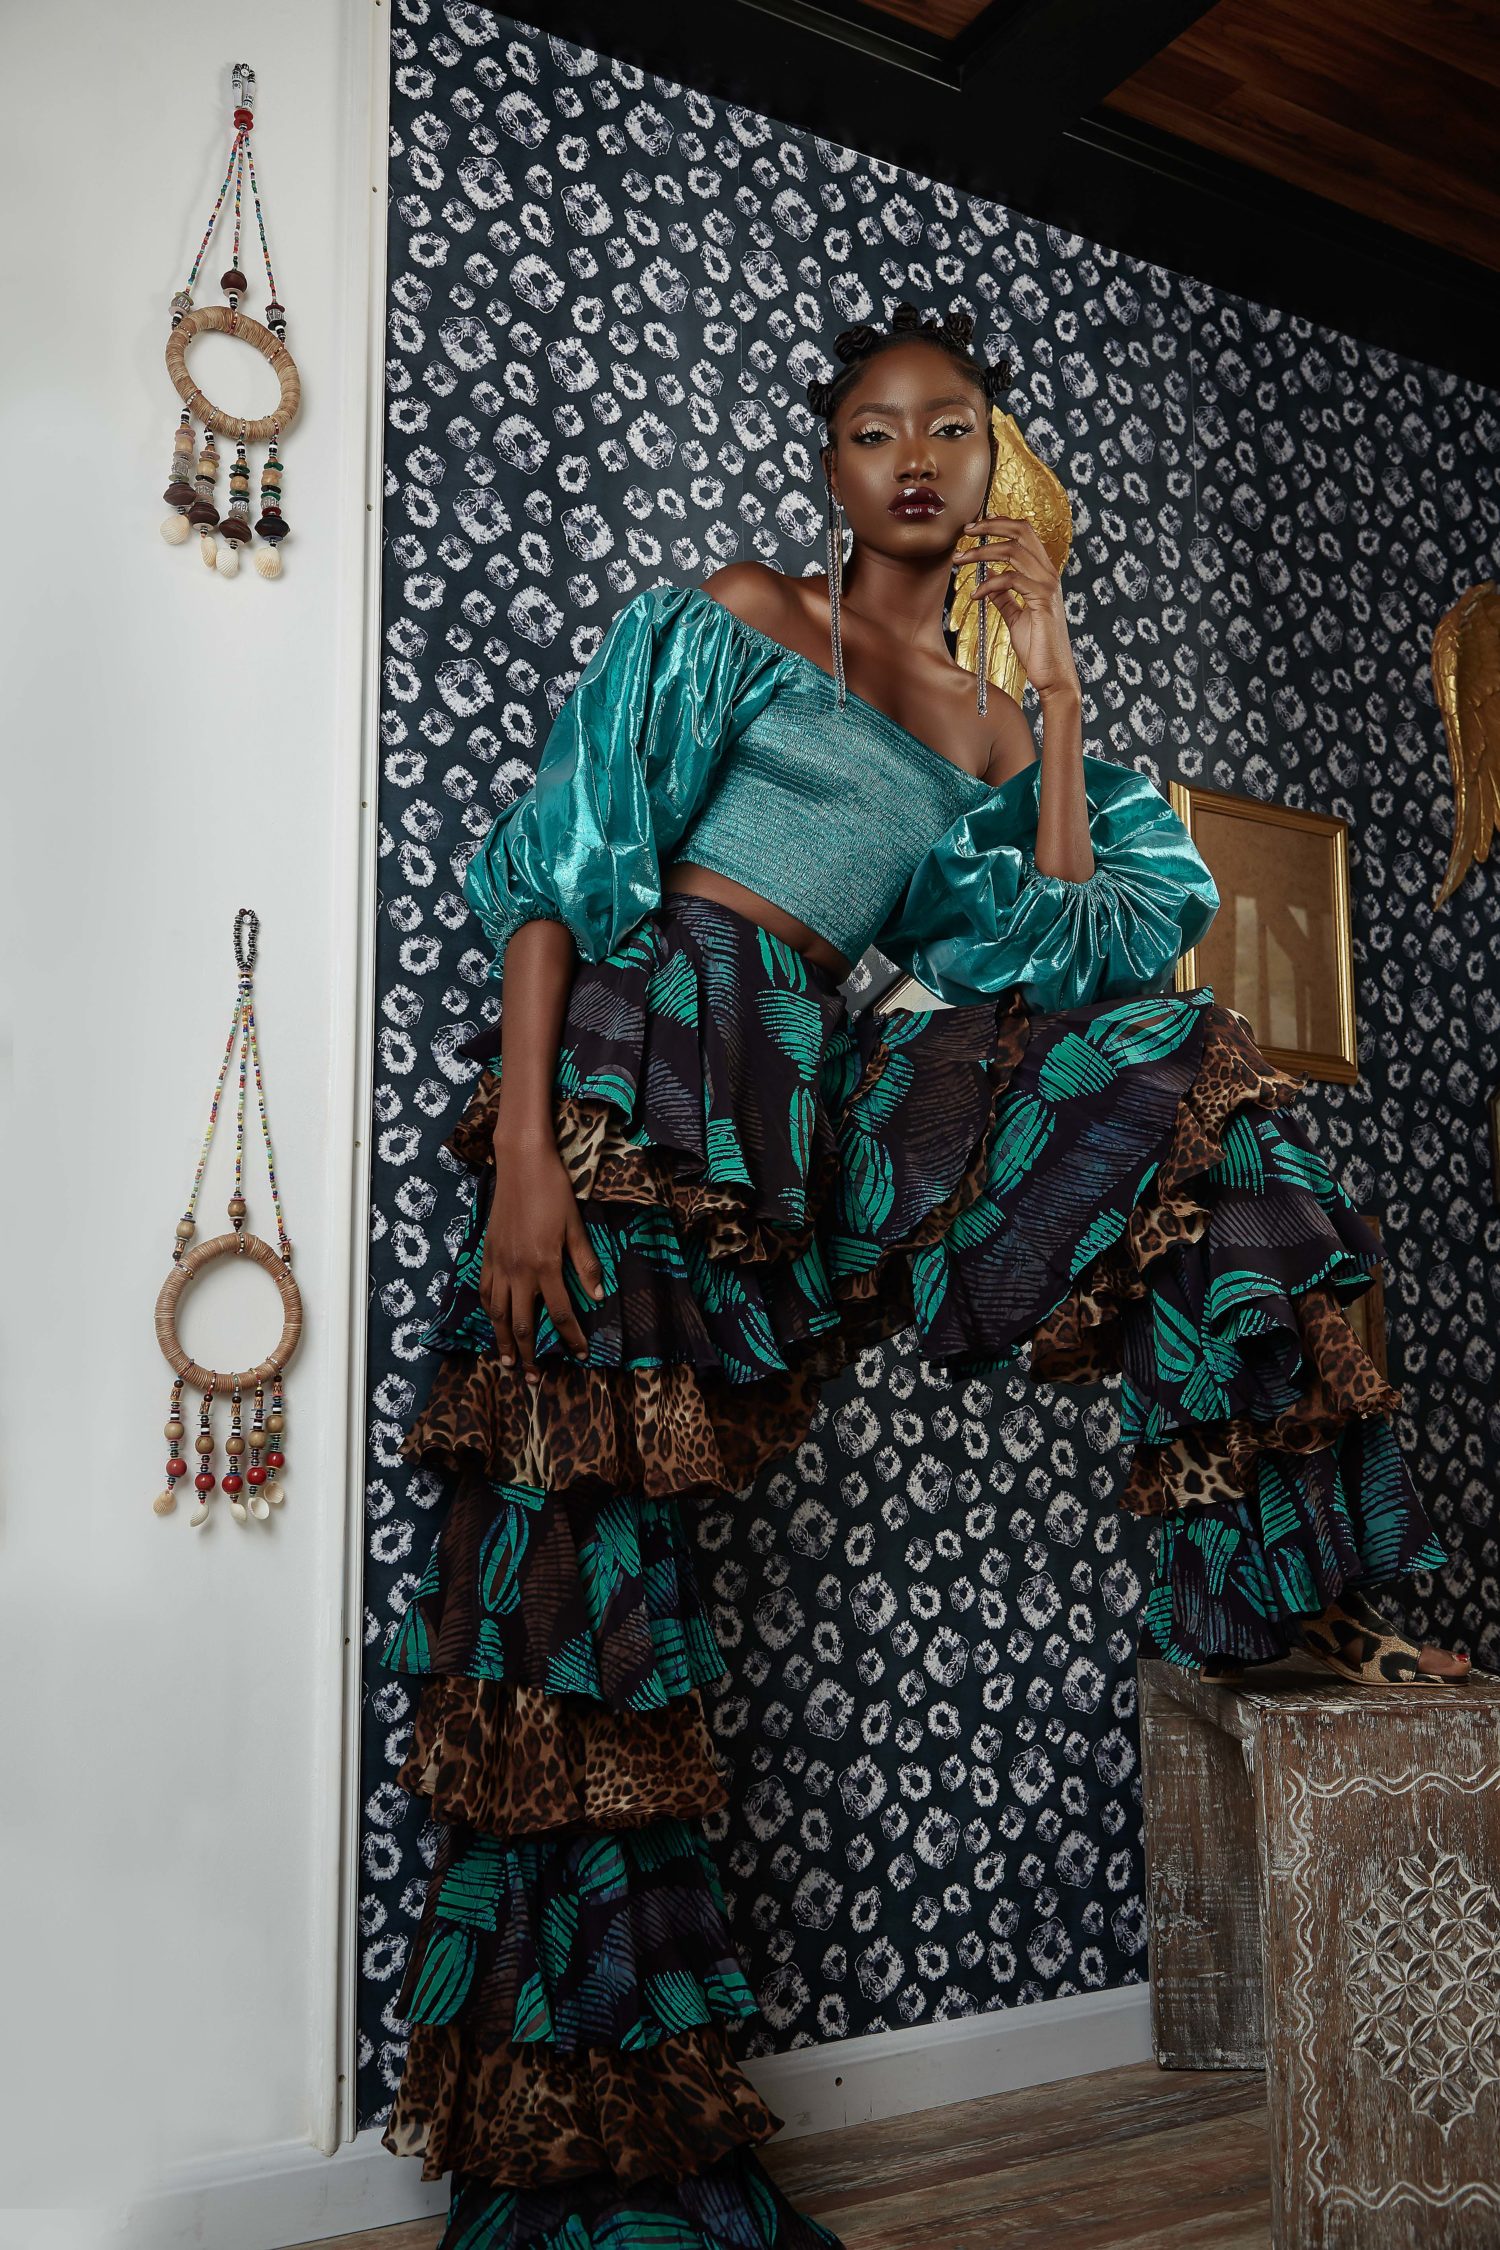 Mix Modern Aesthetics with Vintage Culture – You’ll Get Mazelle’s Stunning “Queen of the East” Collection